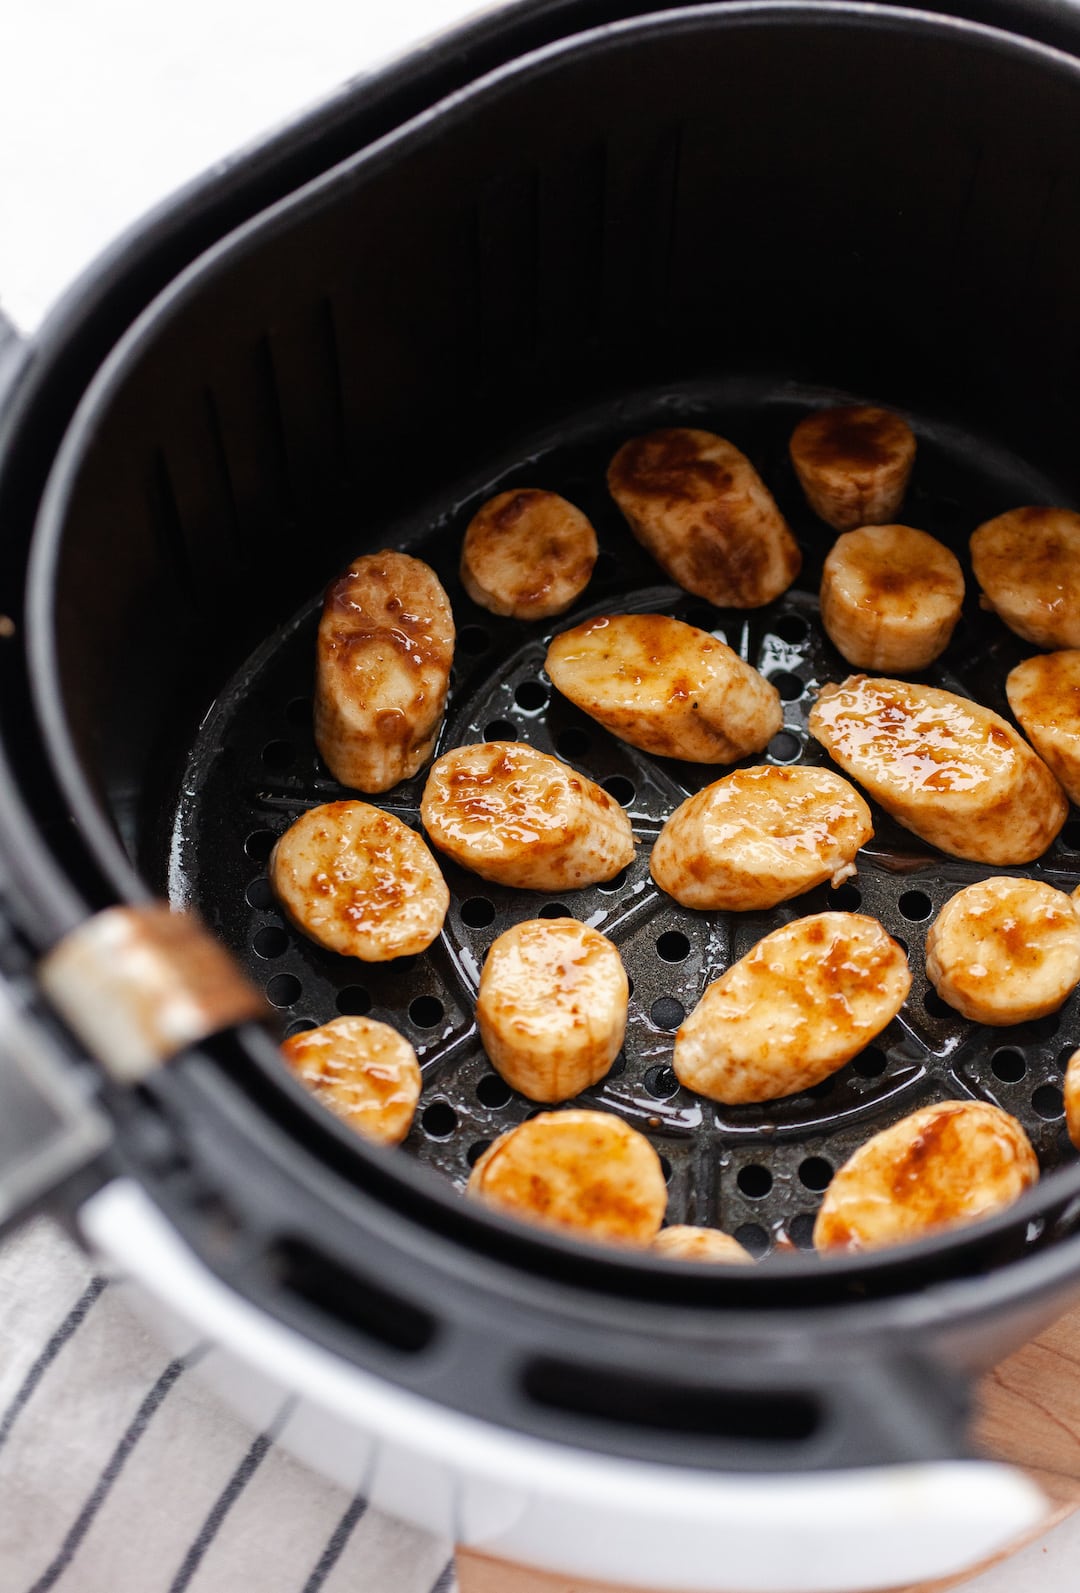 image of an air fryer basket filled with banana slices topped in cinnamon and coconut sugar